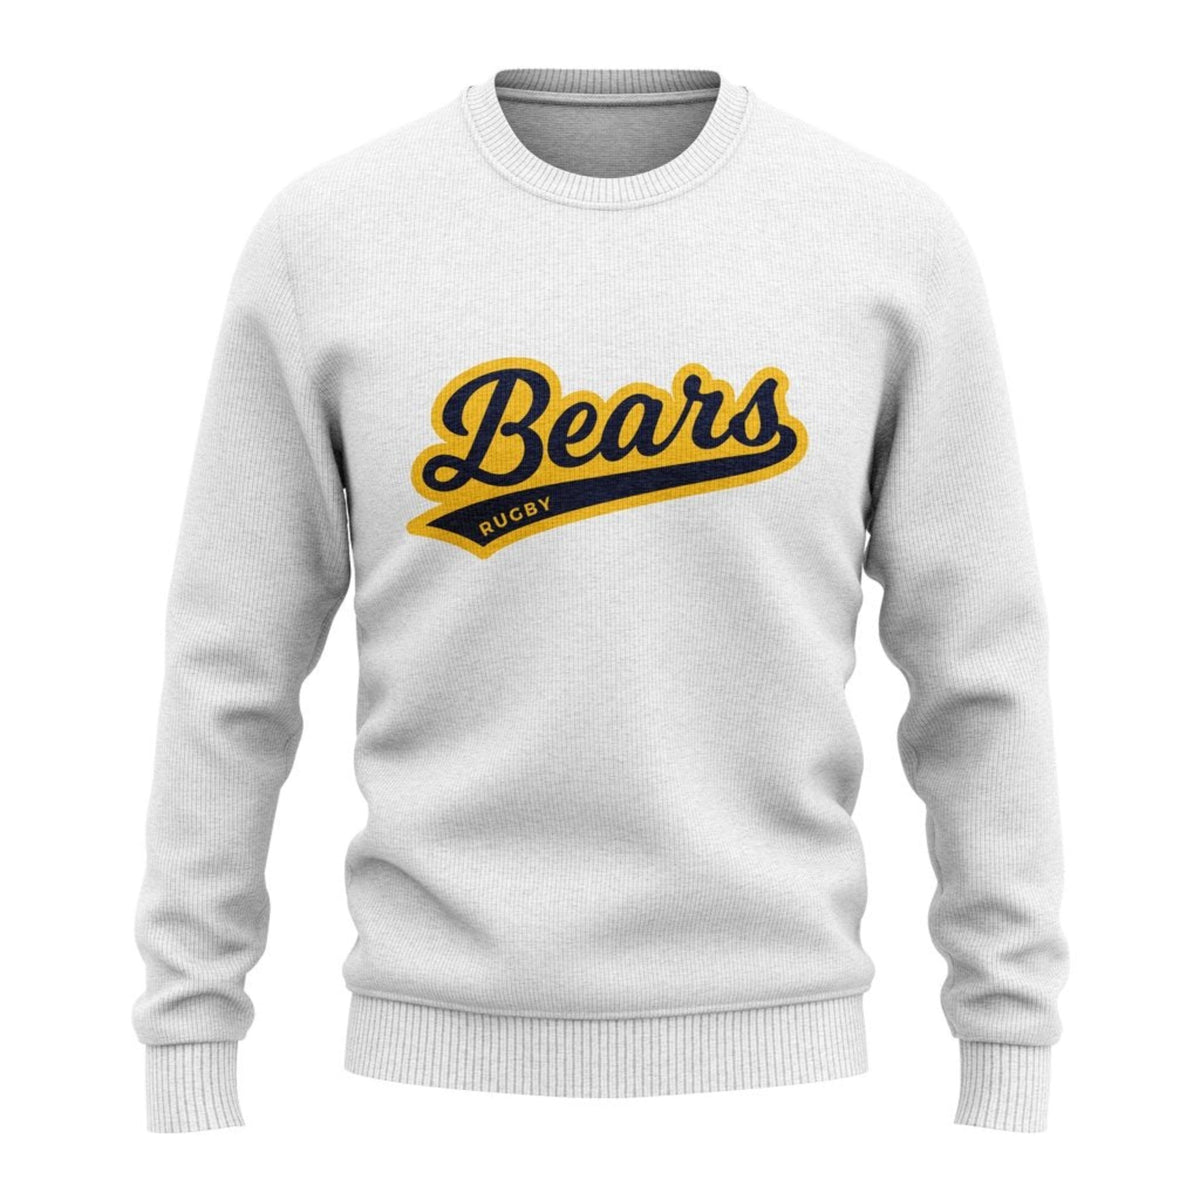 BC Rugby 2021 &quot;Bears&quot; Crew Neck Sweater - Adult Unisex - www.therugbyshop.com www.therugbyshop.com UNISEX / WHITE / S XIX Brands HOODIES BC Rugby 2021 &quot;Bears&quot; Crew Neck Sweater - Adult Unisex